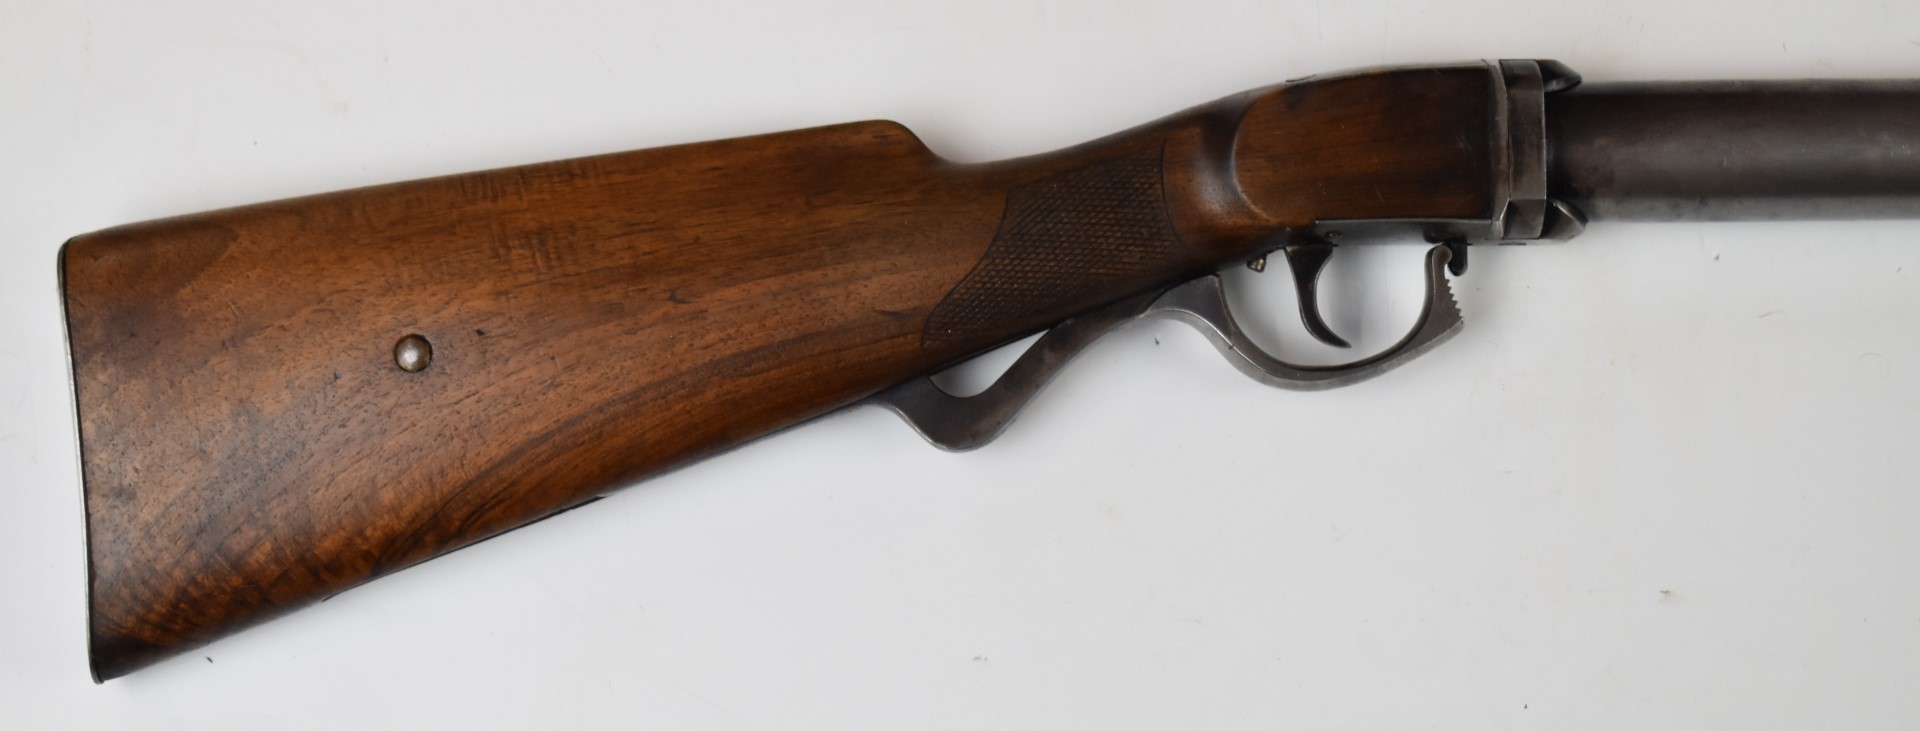 Oscar Will Bugelspanner .177 underlever air rifle with chequered grip, metal butt plate, - Image 3 of 8